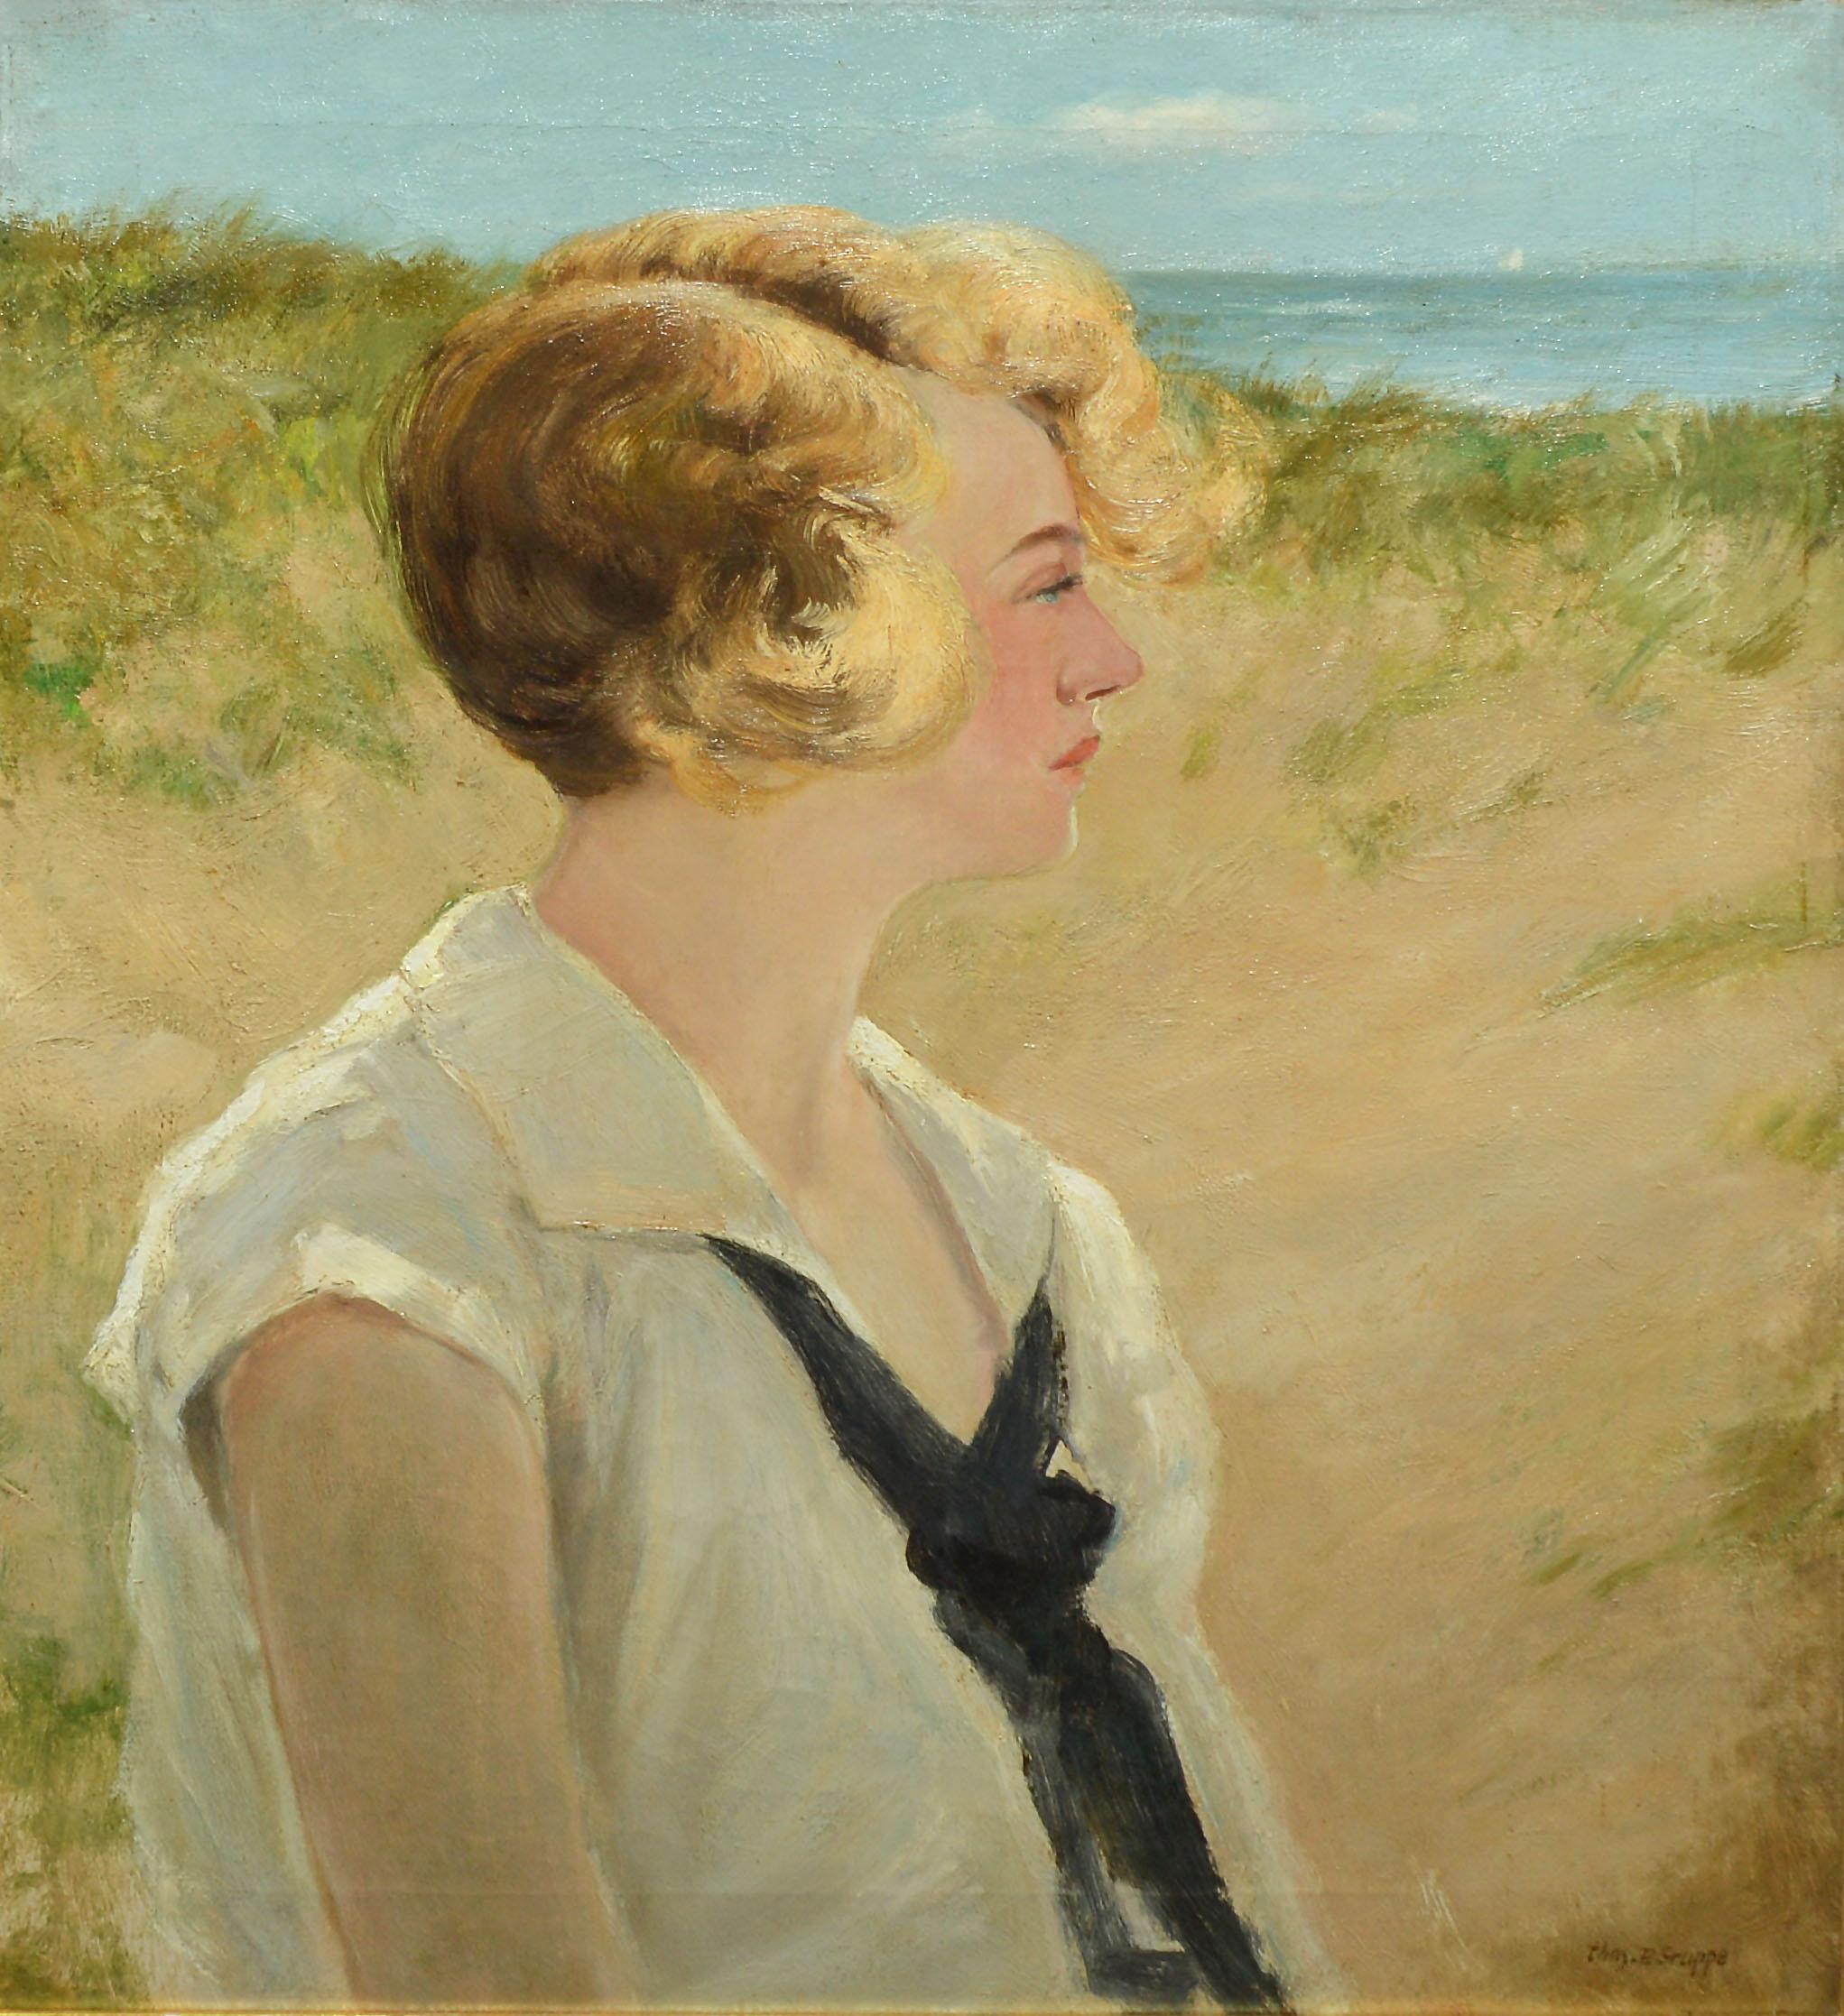 Antique Impressionist Seaside Beach Portrait Oil Painting by Charles Gruppe - Brown Landscape Painting by Frank Moratz   